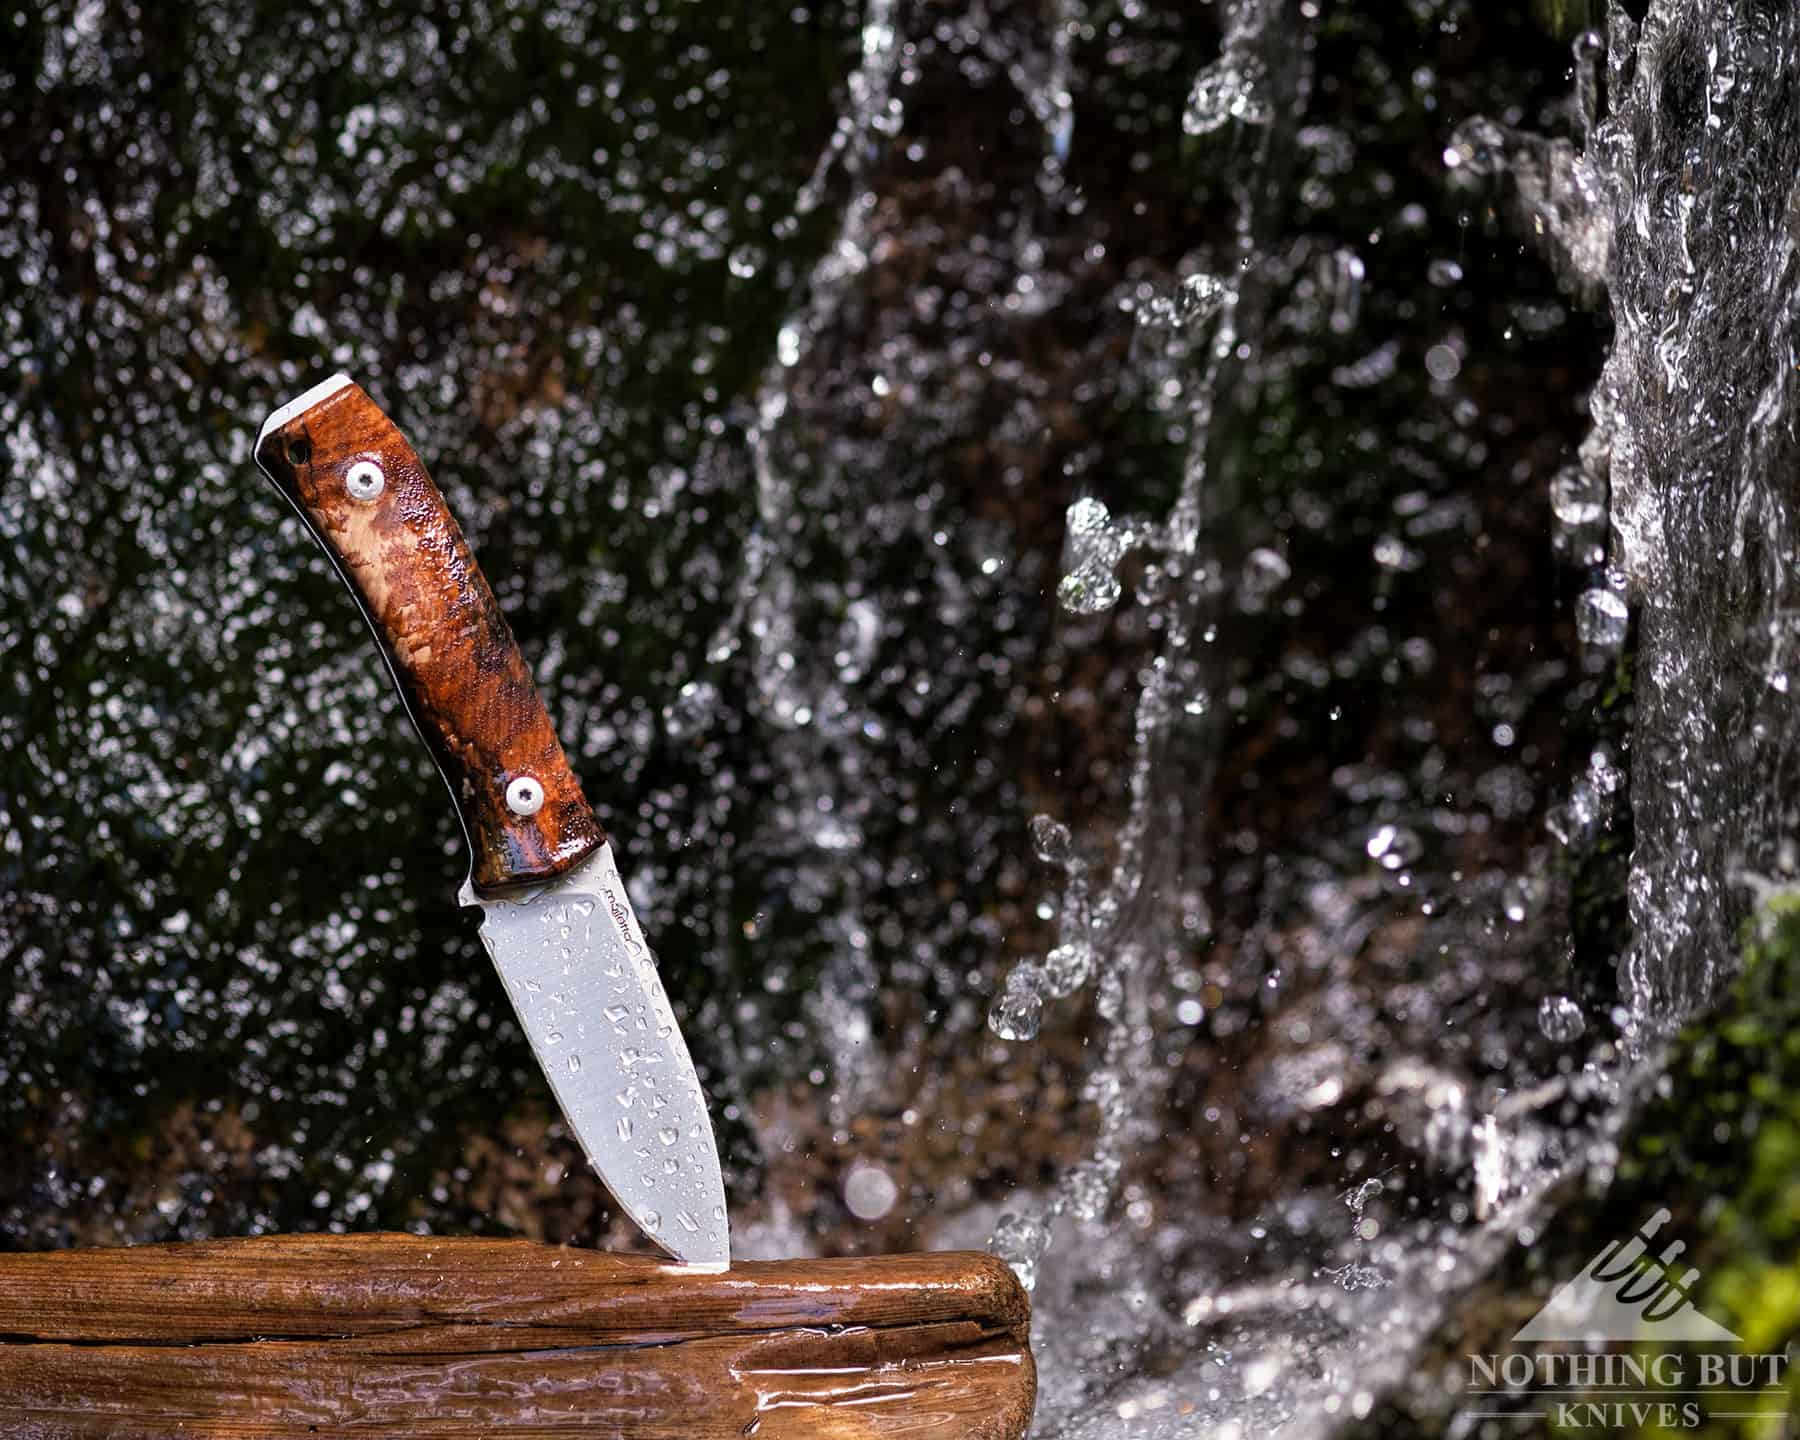 The LionSteel M4 in should be dried and oiled any time it gets wet. 